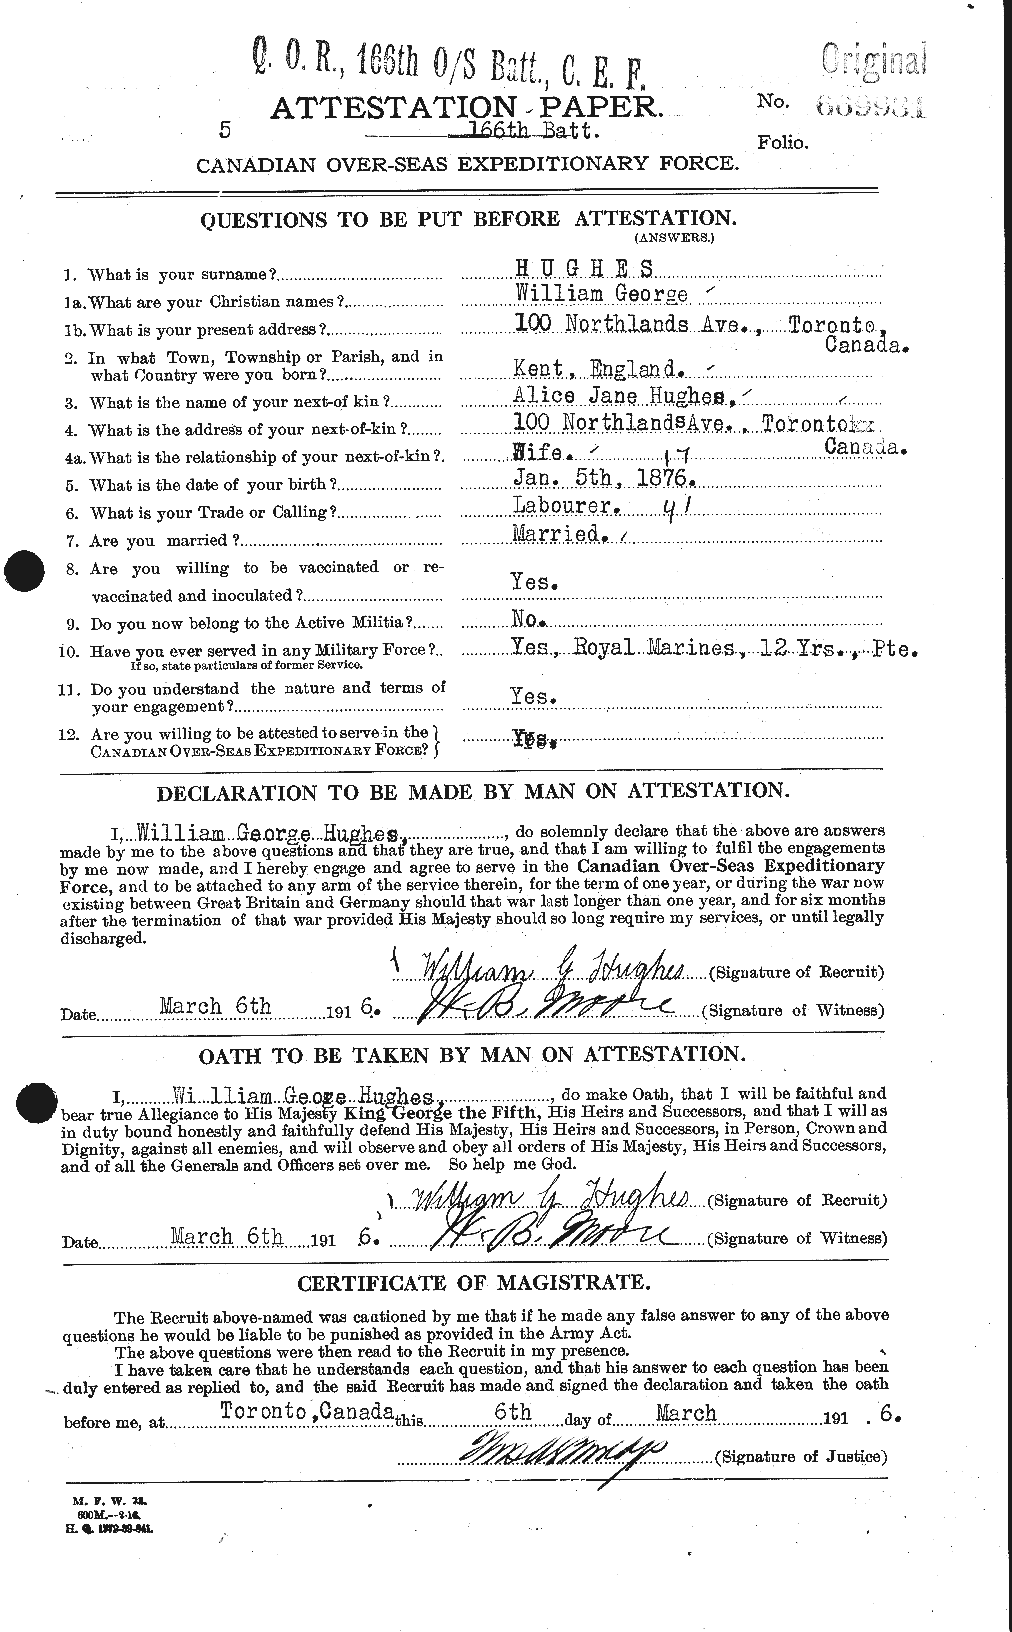 Personnel Records of the First World War - CEF 405925a